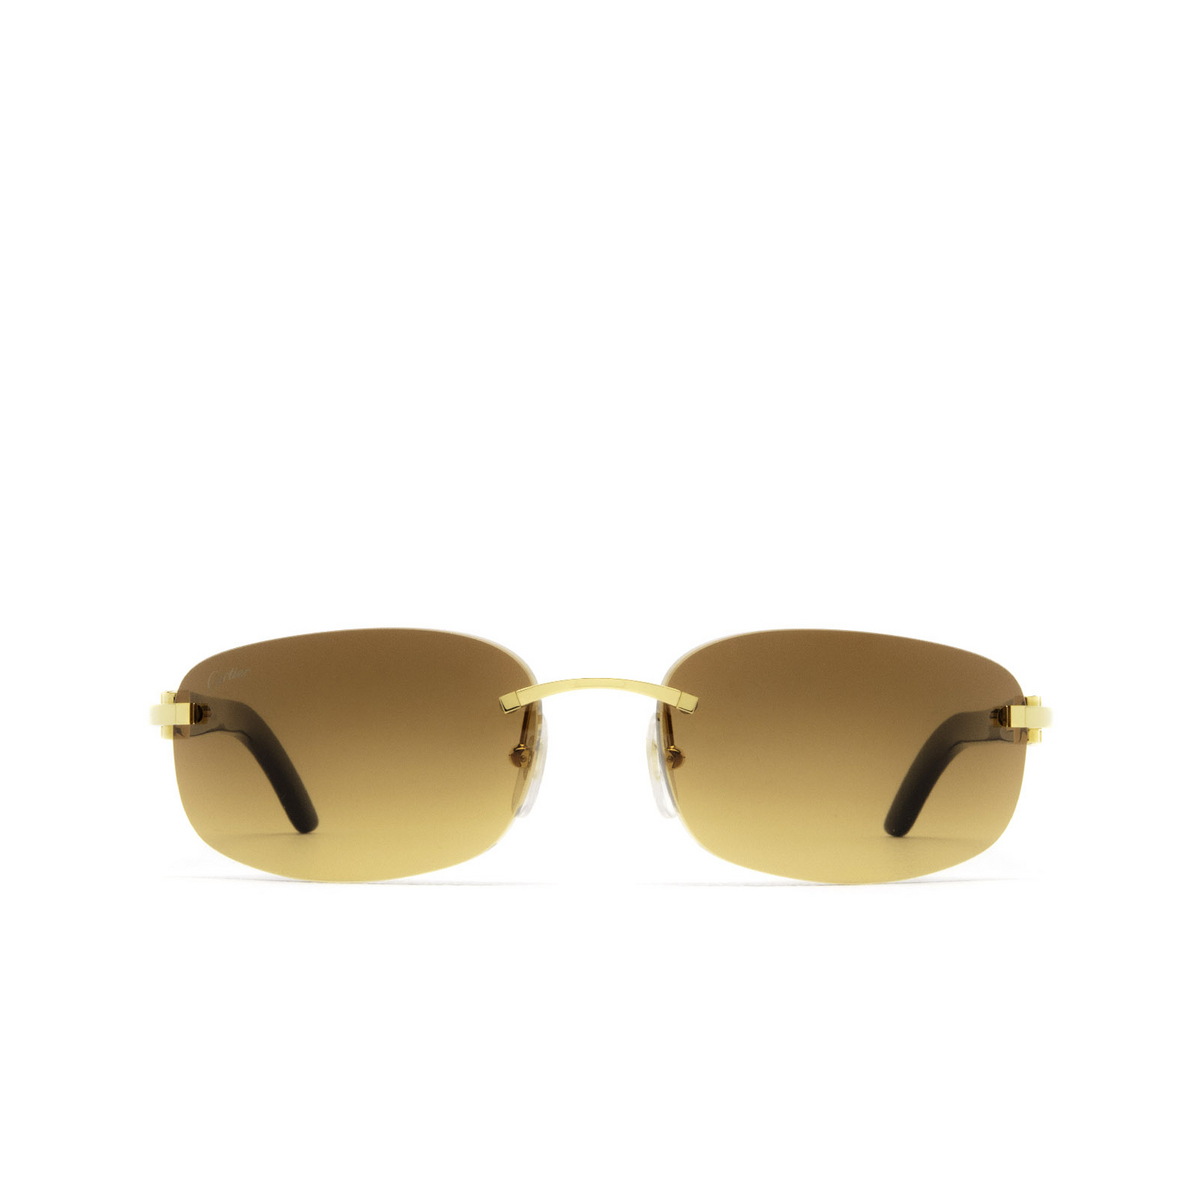 Cartier® Rectangle Sunglasses: CT0020RS color Gold 001 - front view.